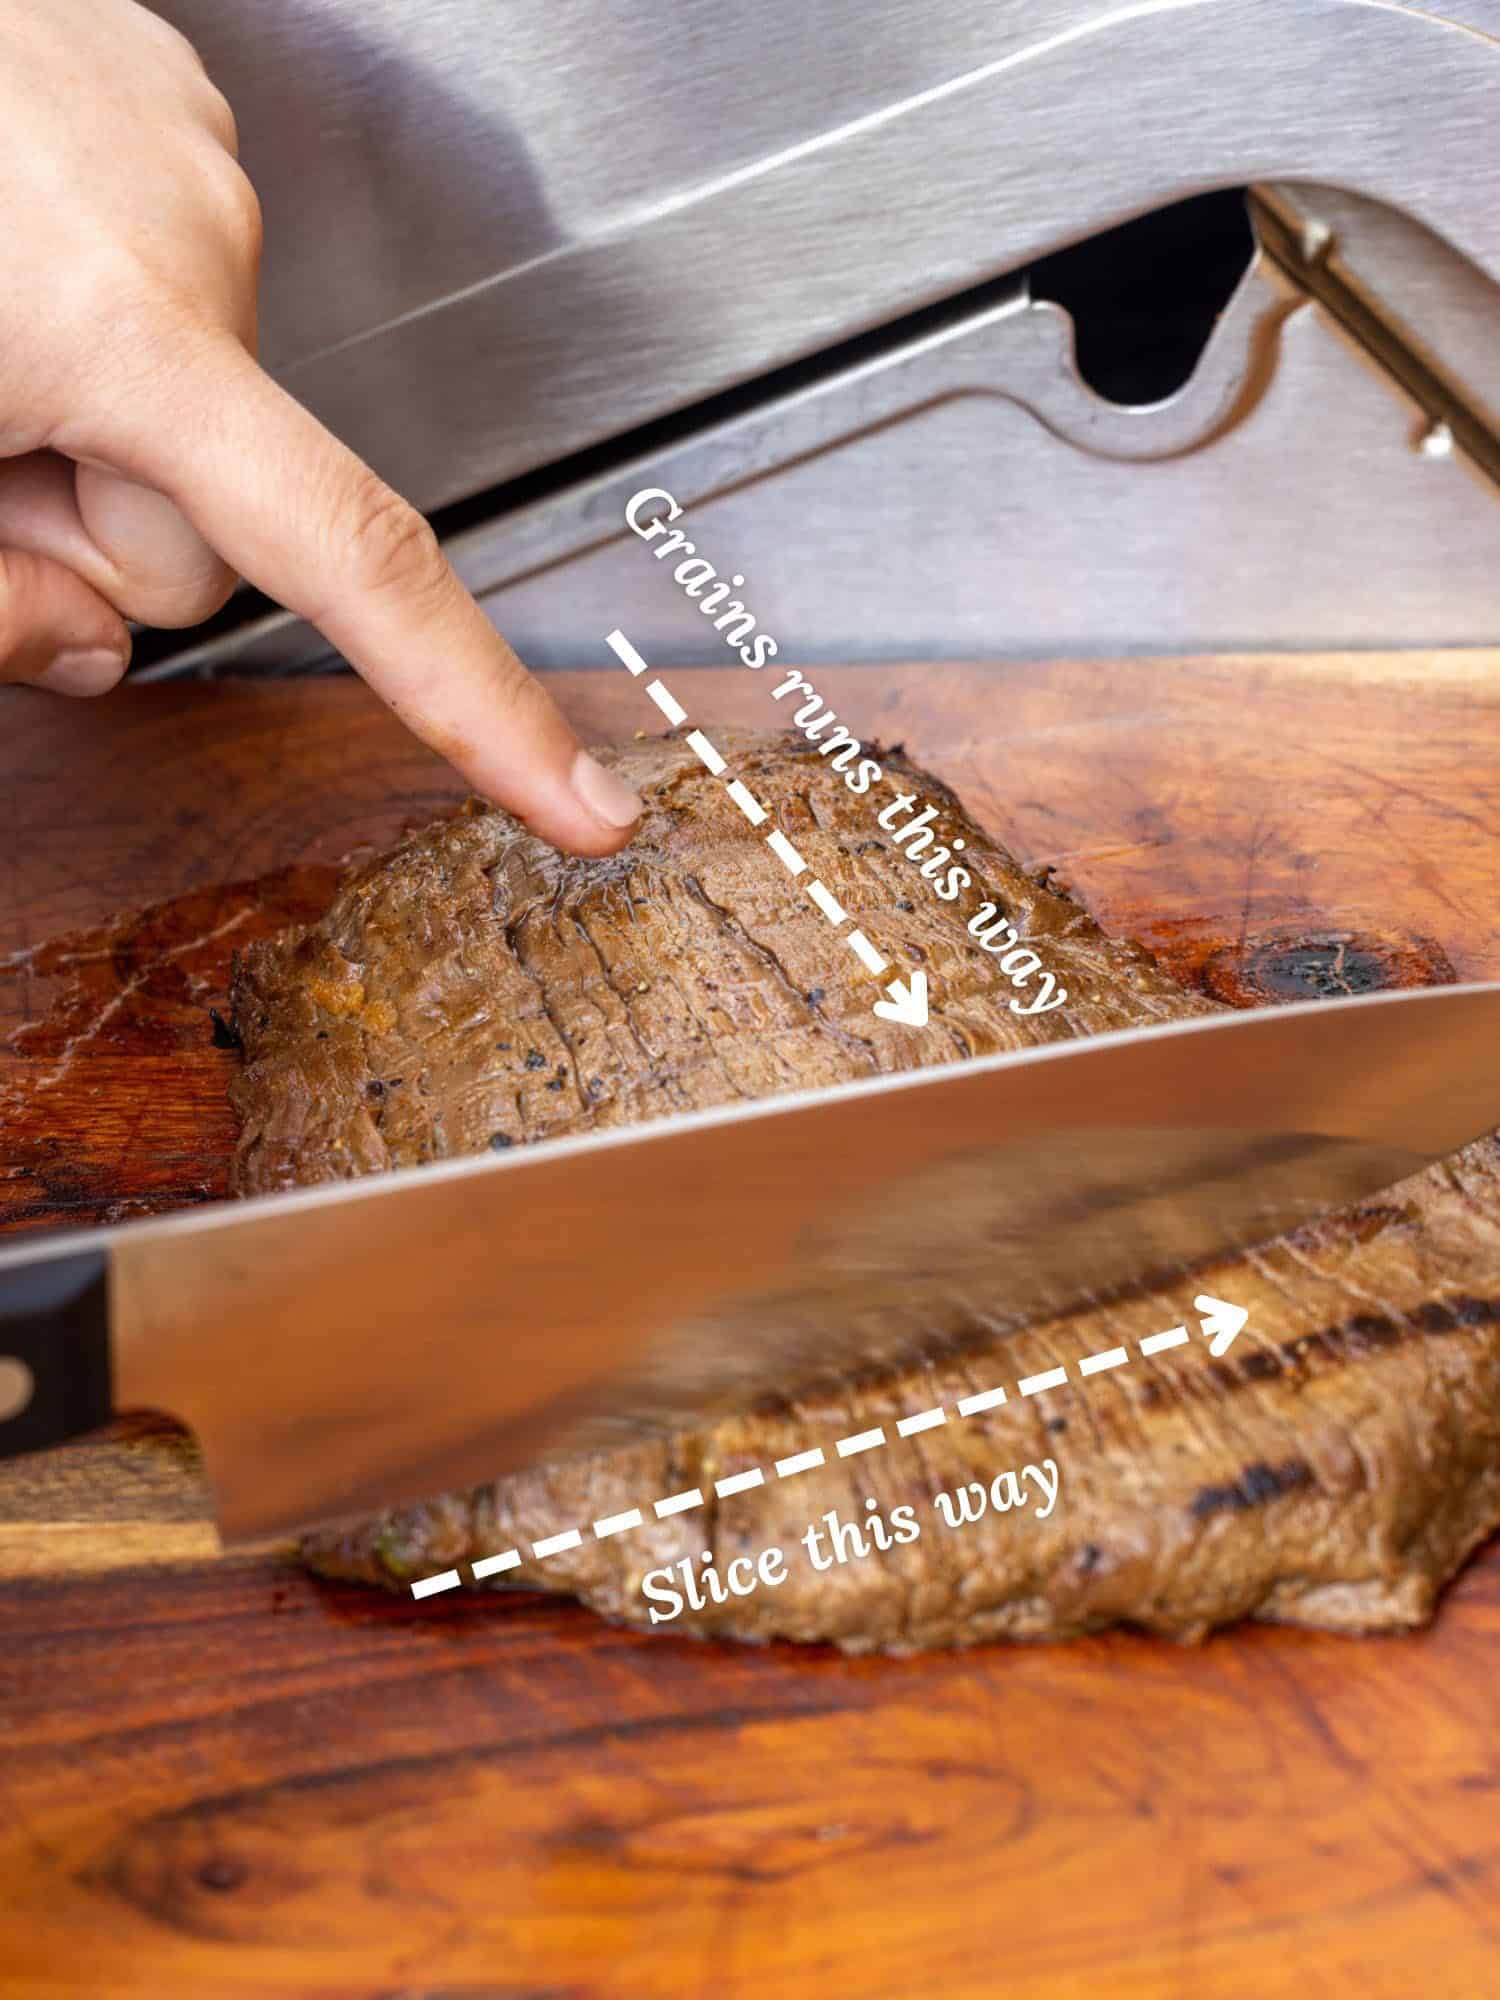 a photo showing a knife cutting into a flank steak against the grain. Arrows indicate that you should slice in the opposite direction of the grain of the meat.